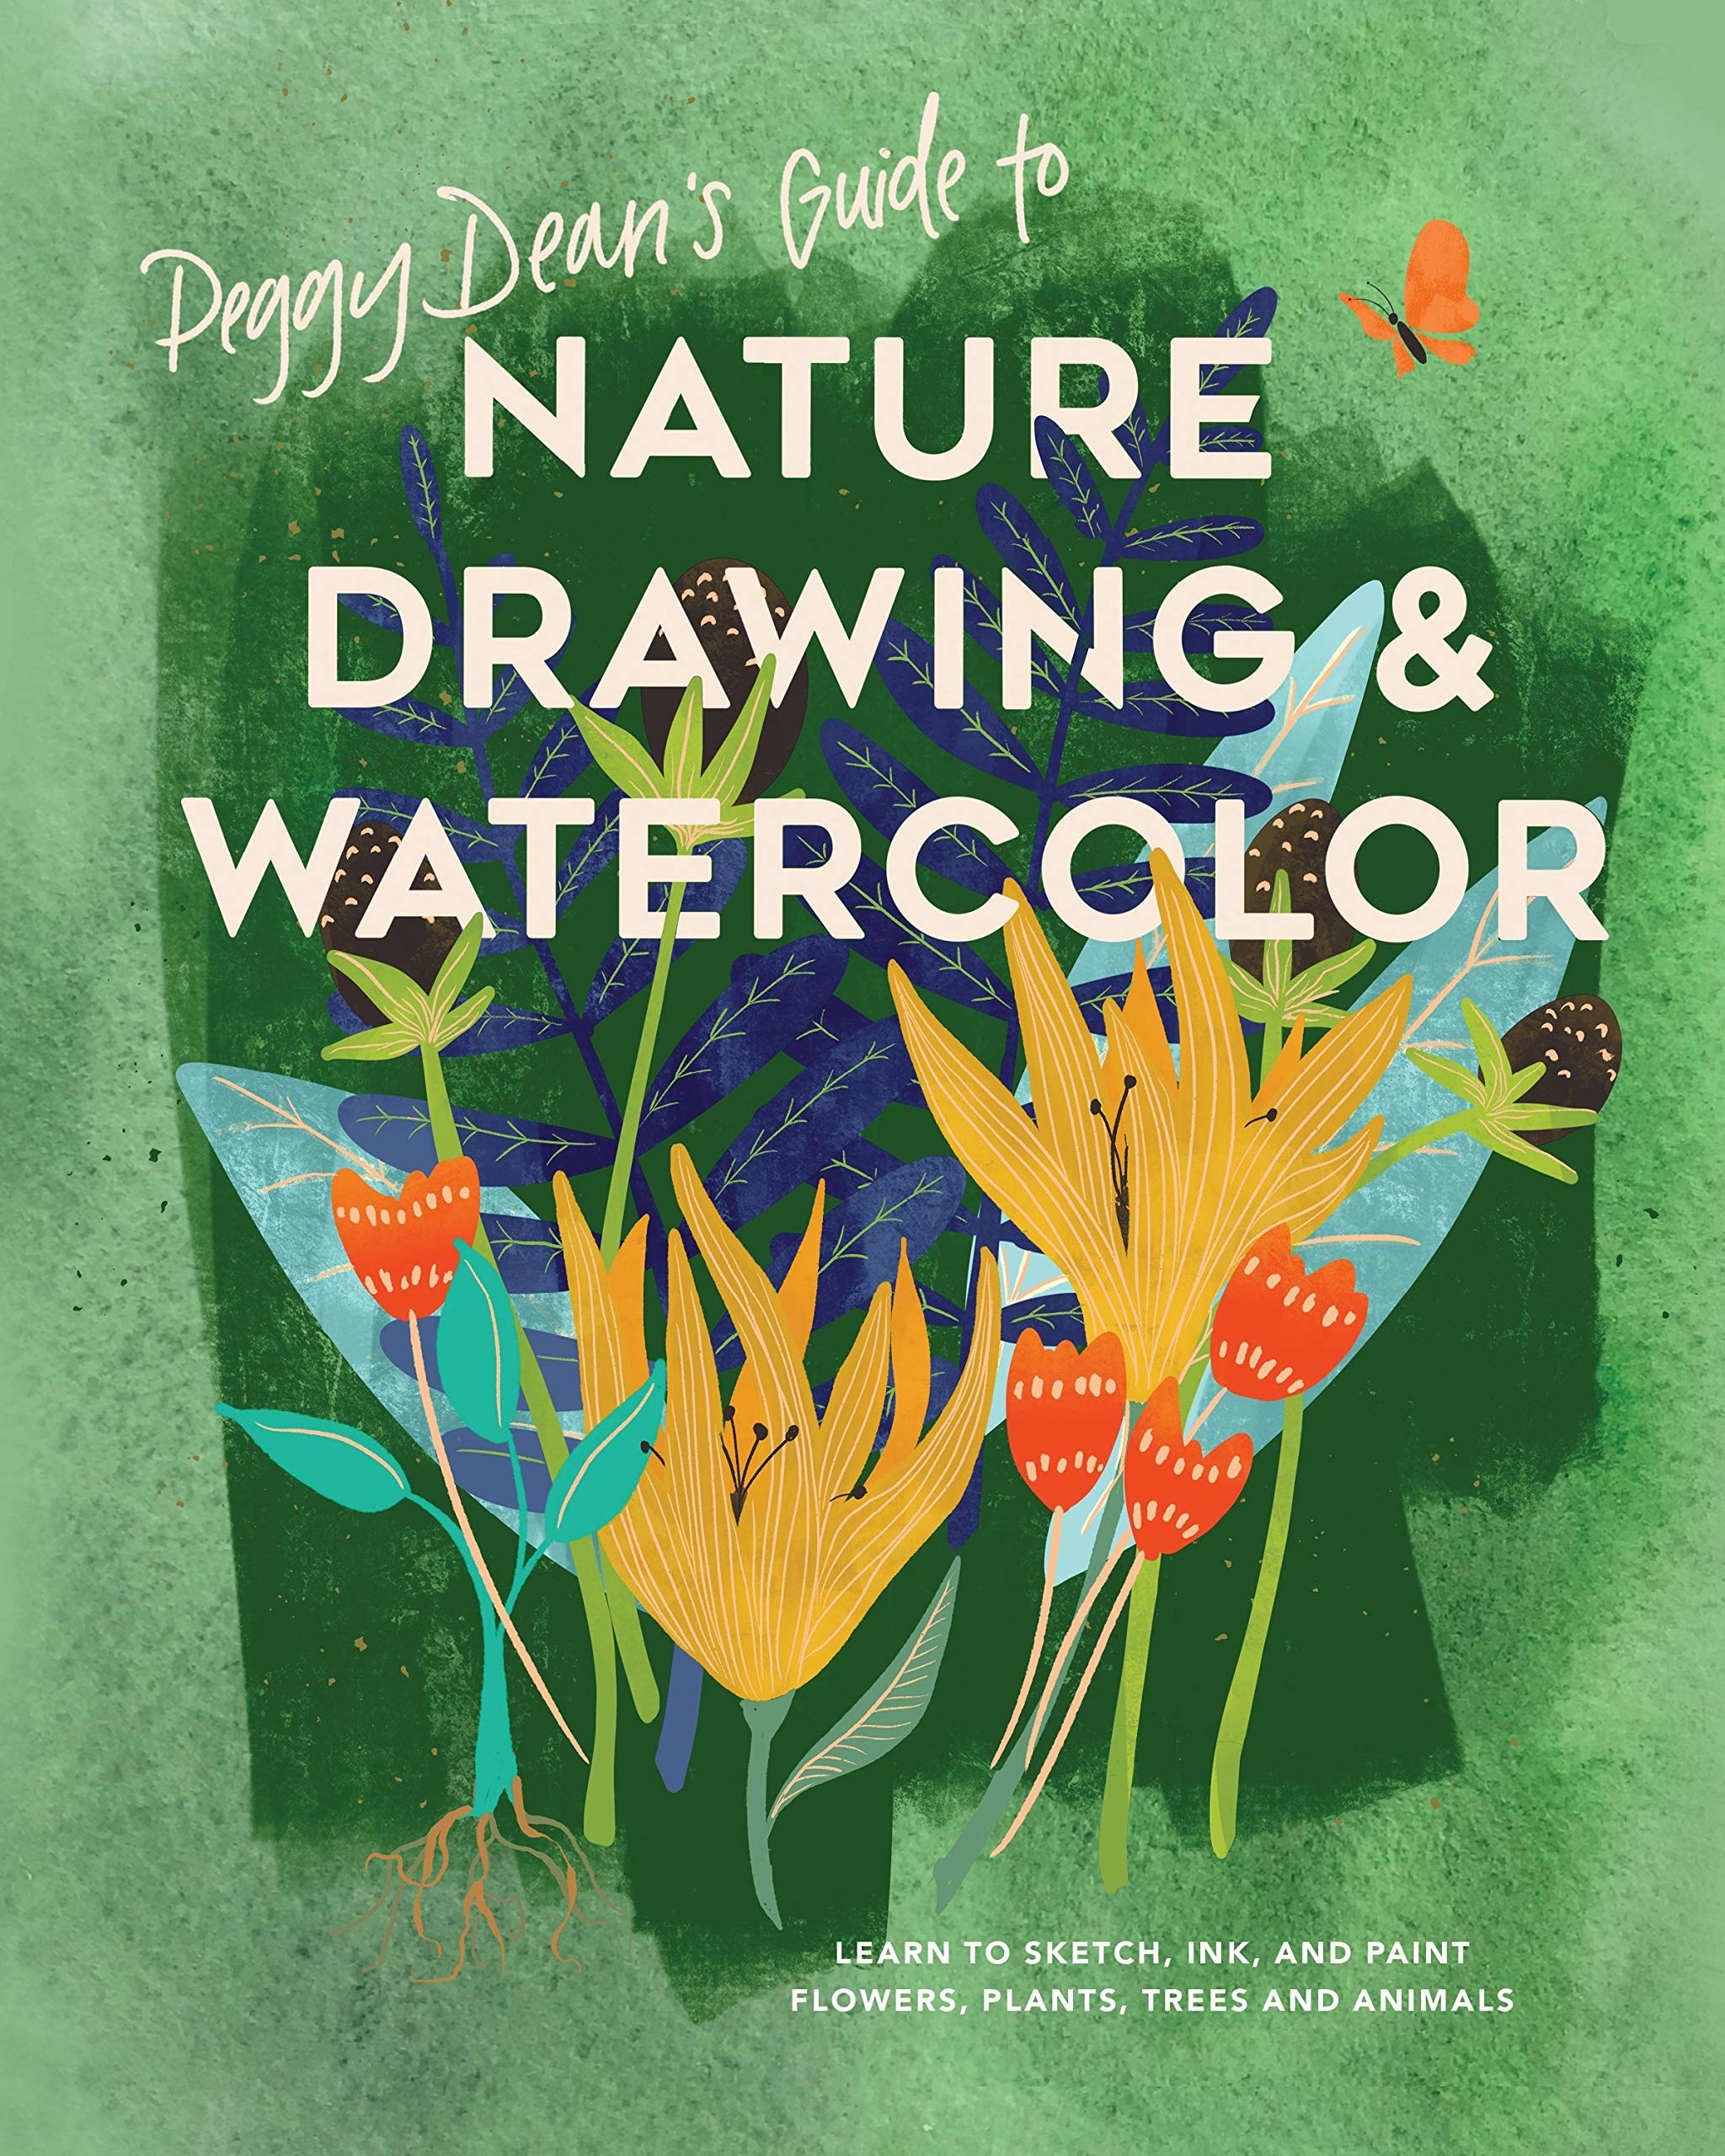 The cover of this watercolor tutorial book